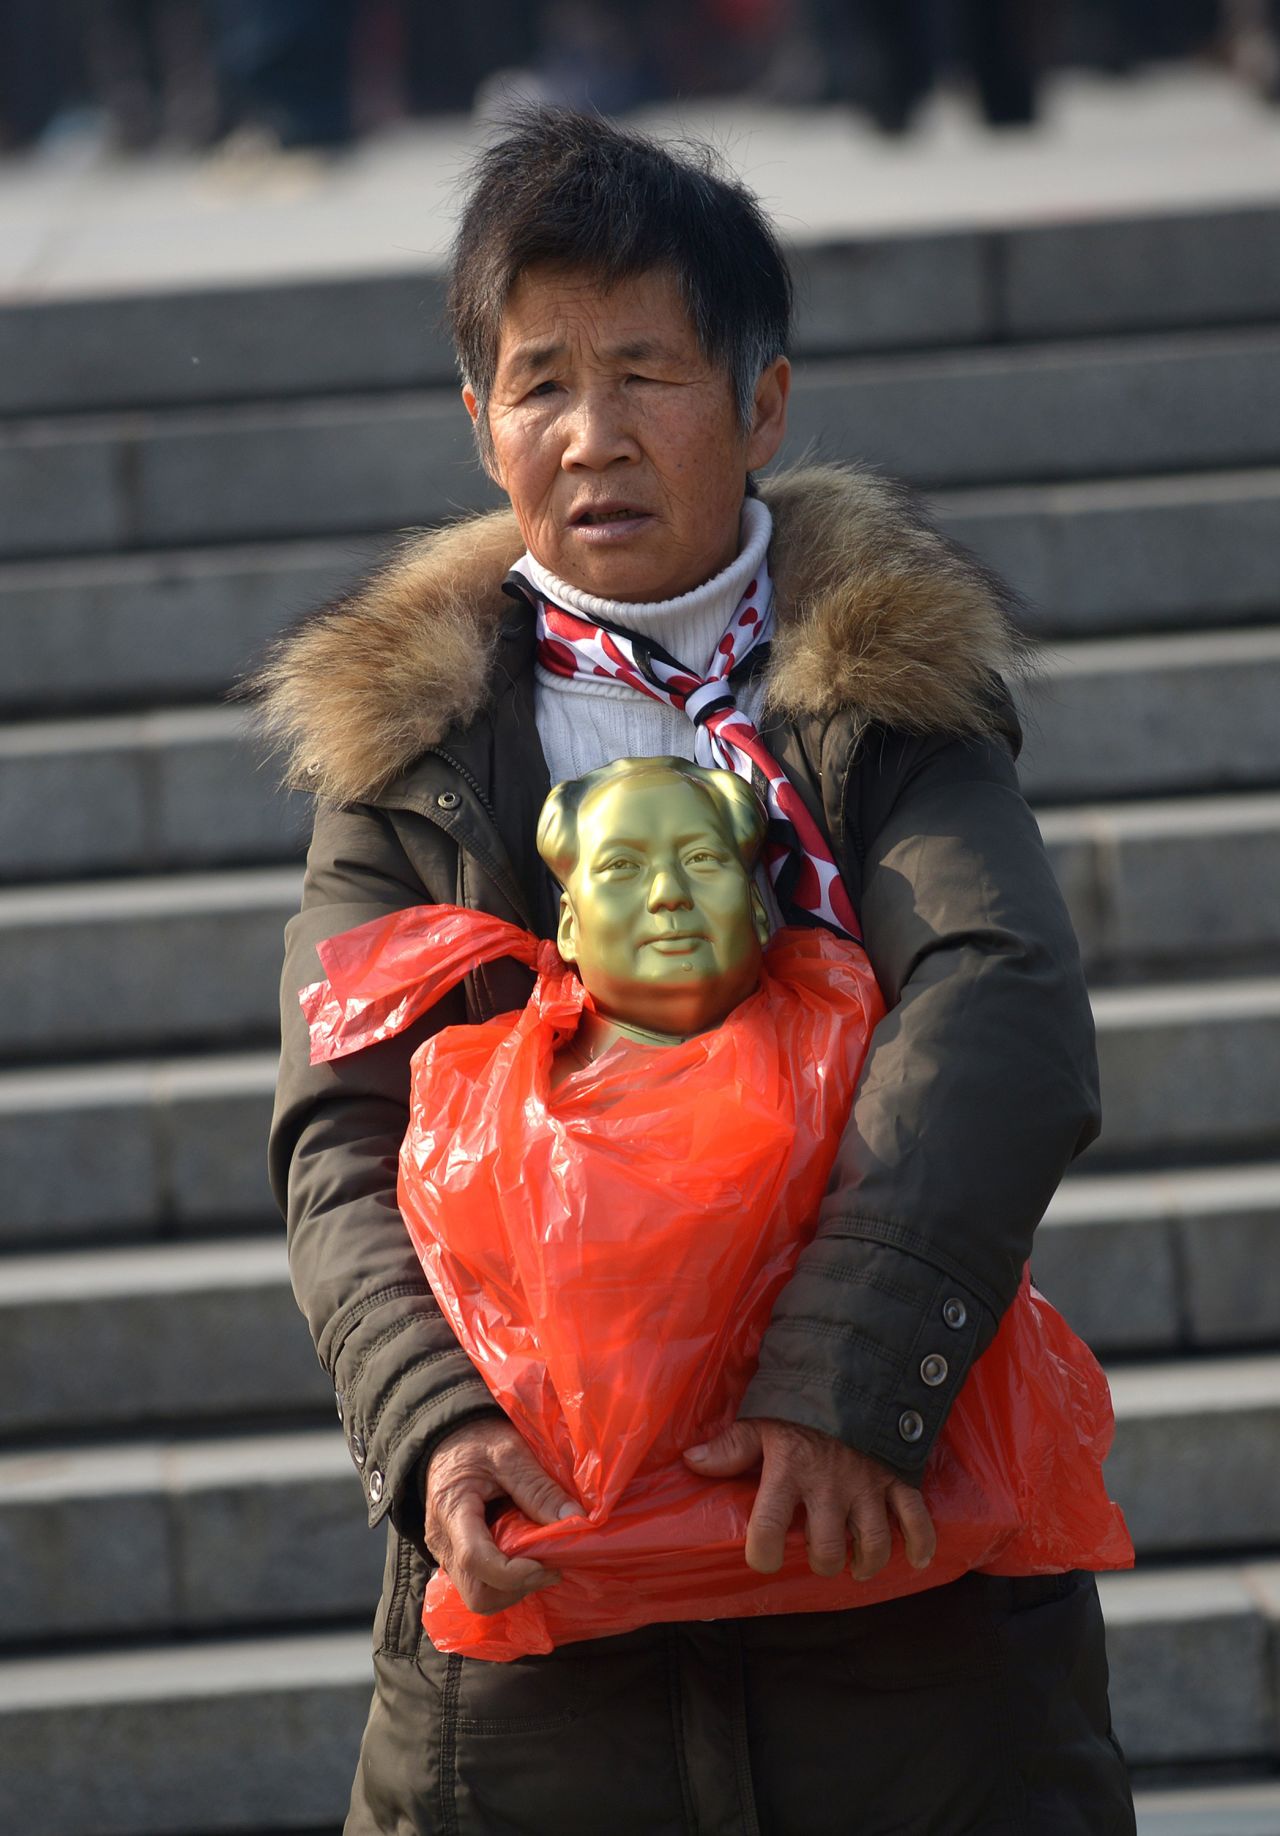 An elderly woman holds a bronze statue of China's former leader Mao Zedong as she makes her way in China's central province of Hunan on December 24, joining others in celebrating Mao's 120th anniversary this week.